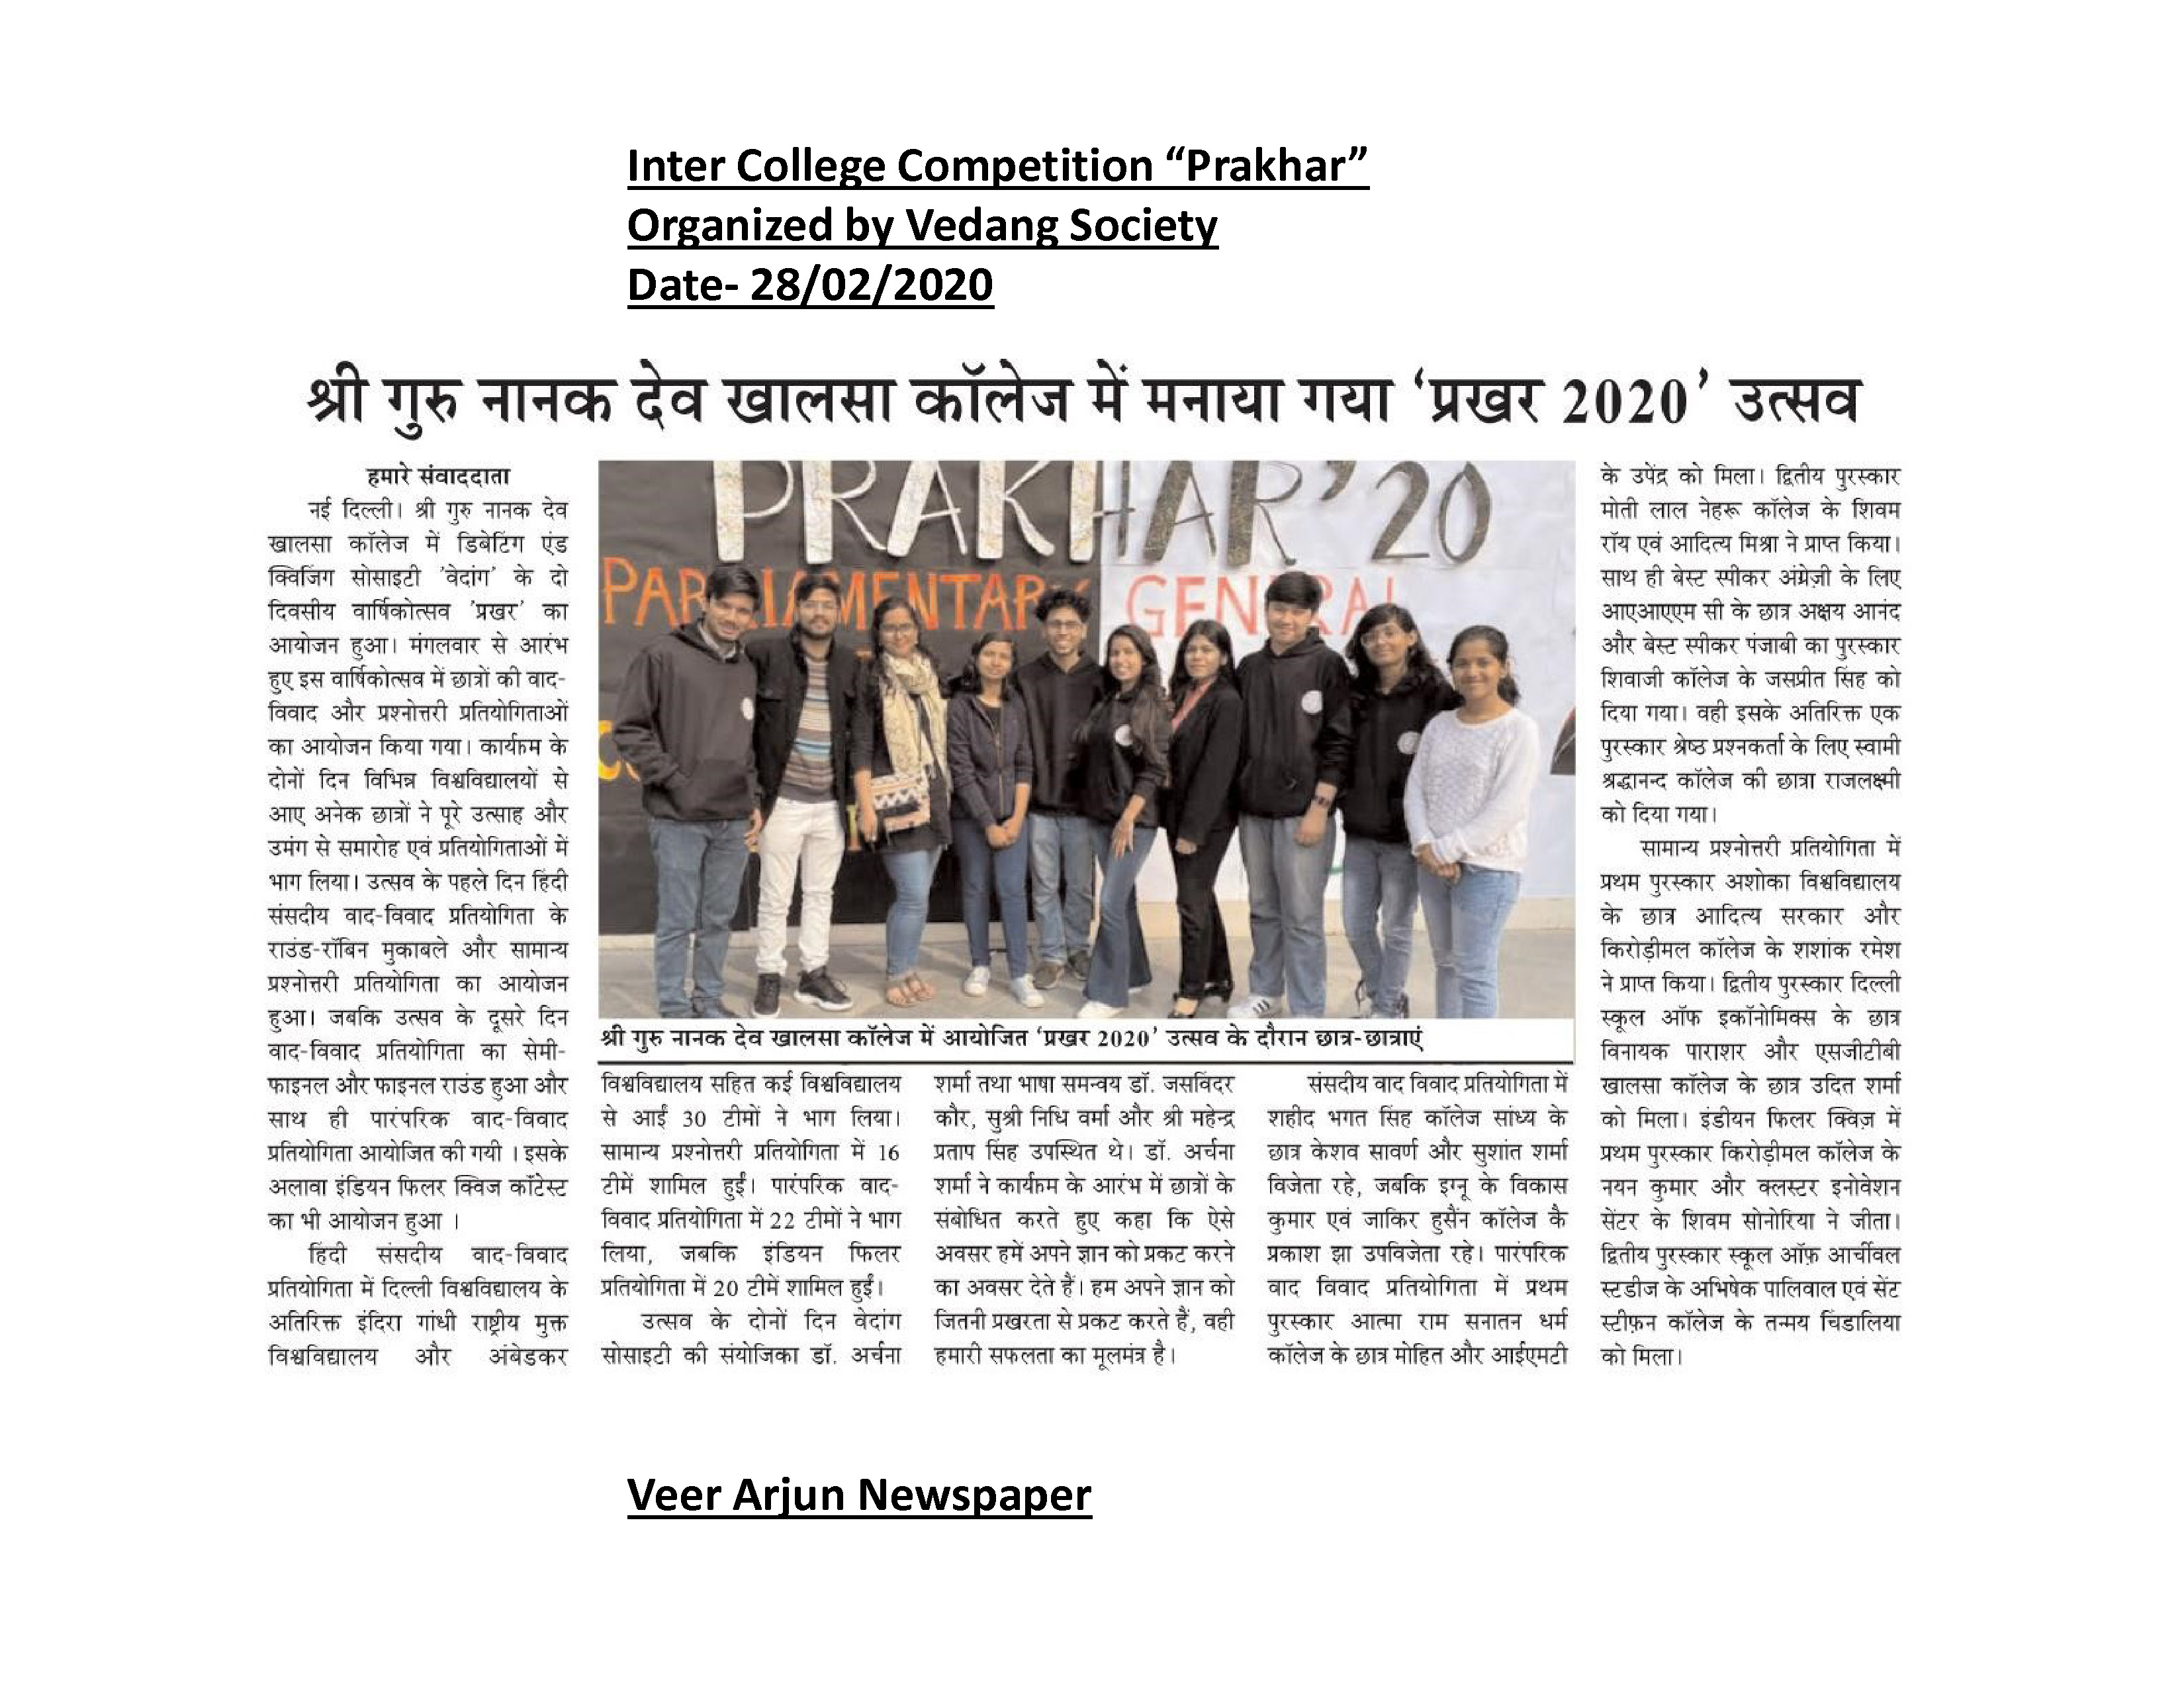 images/mediaspeaks/press clipping_Page_21.jpg